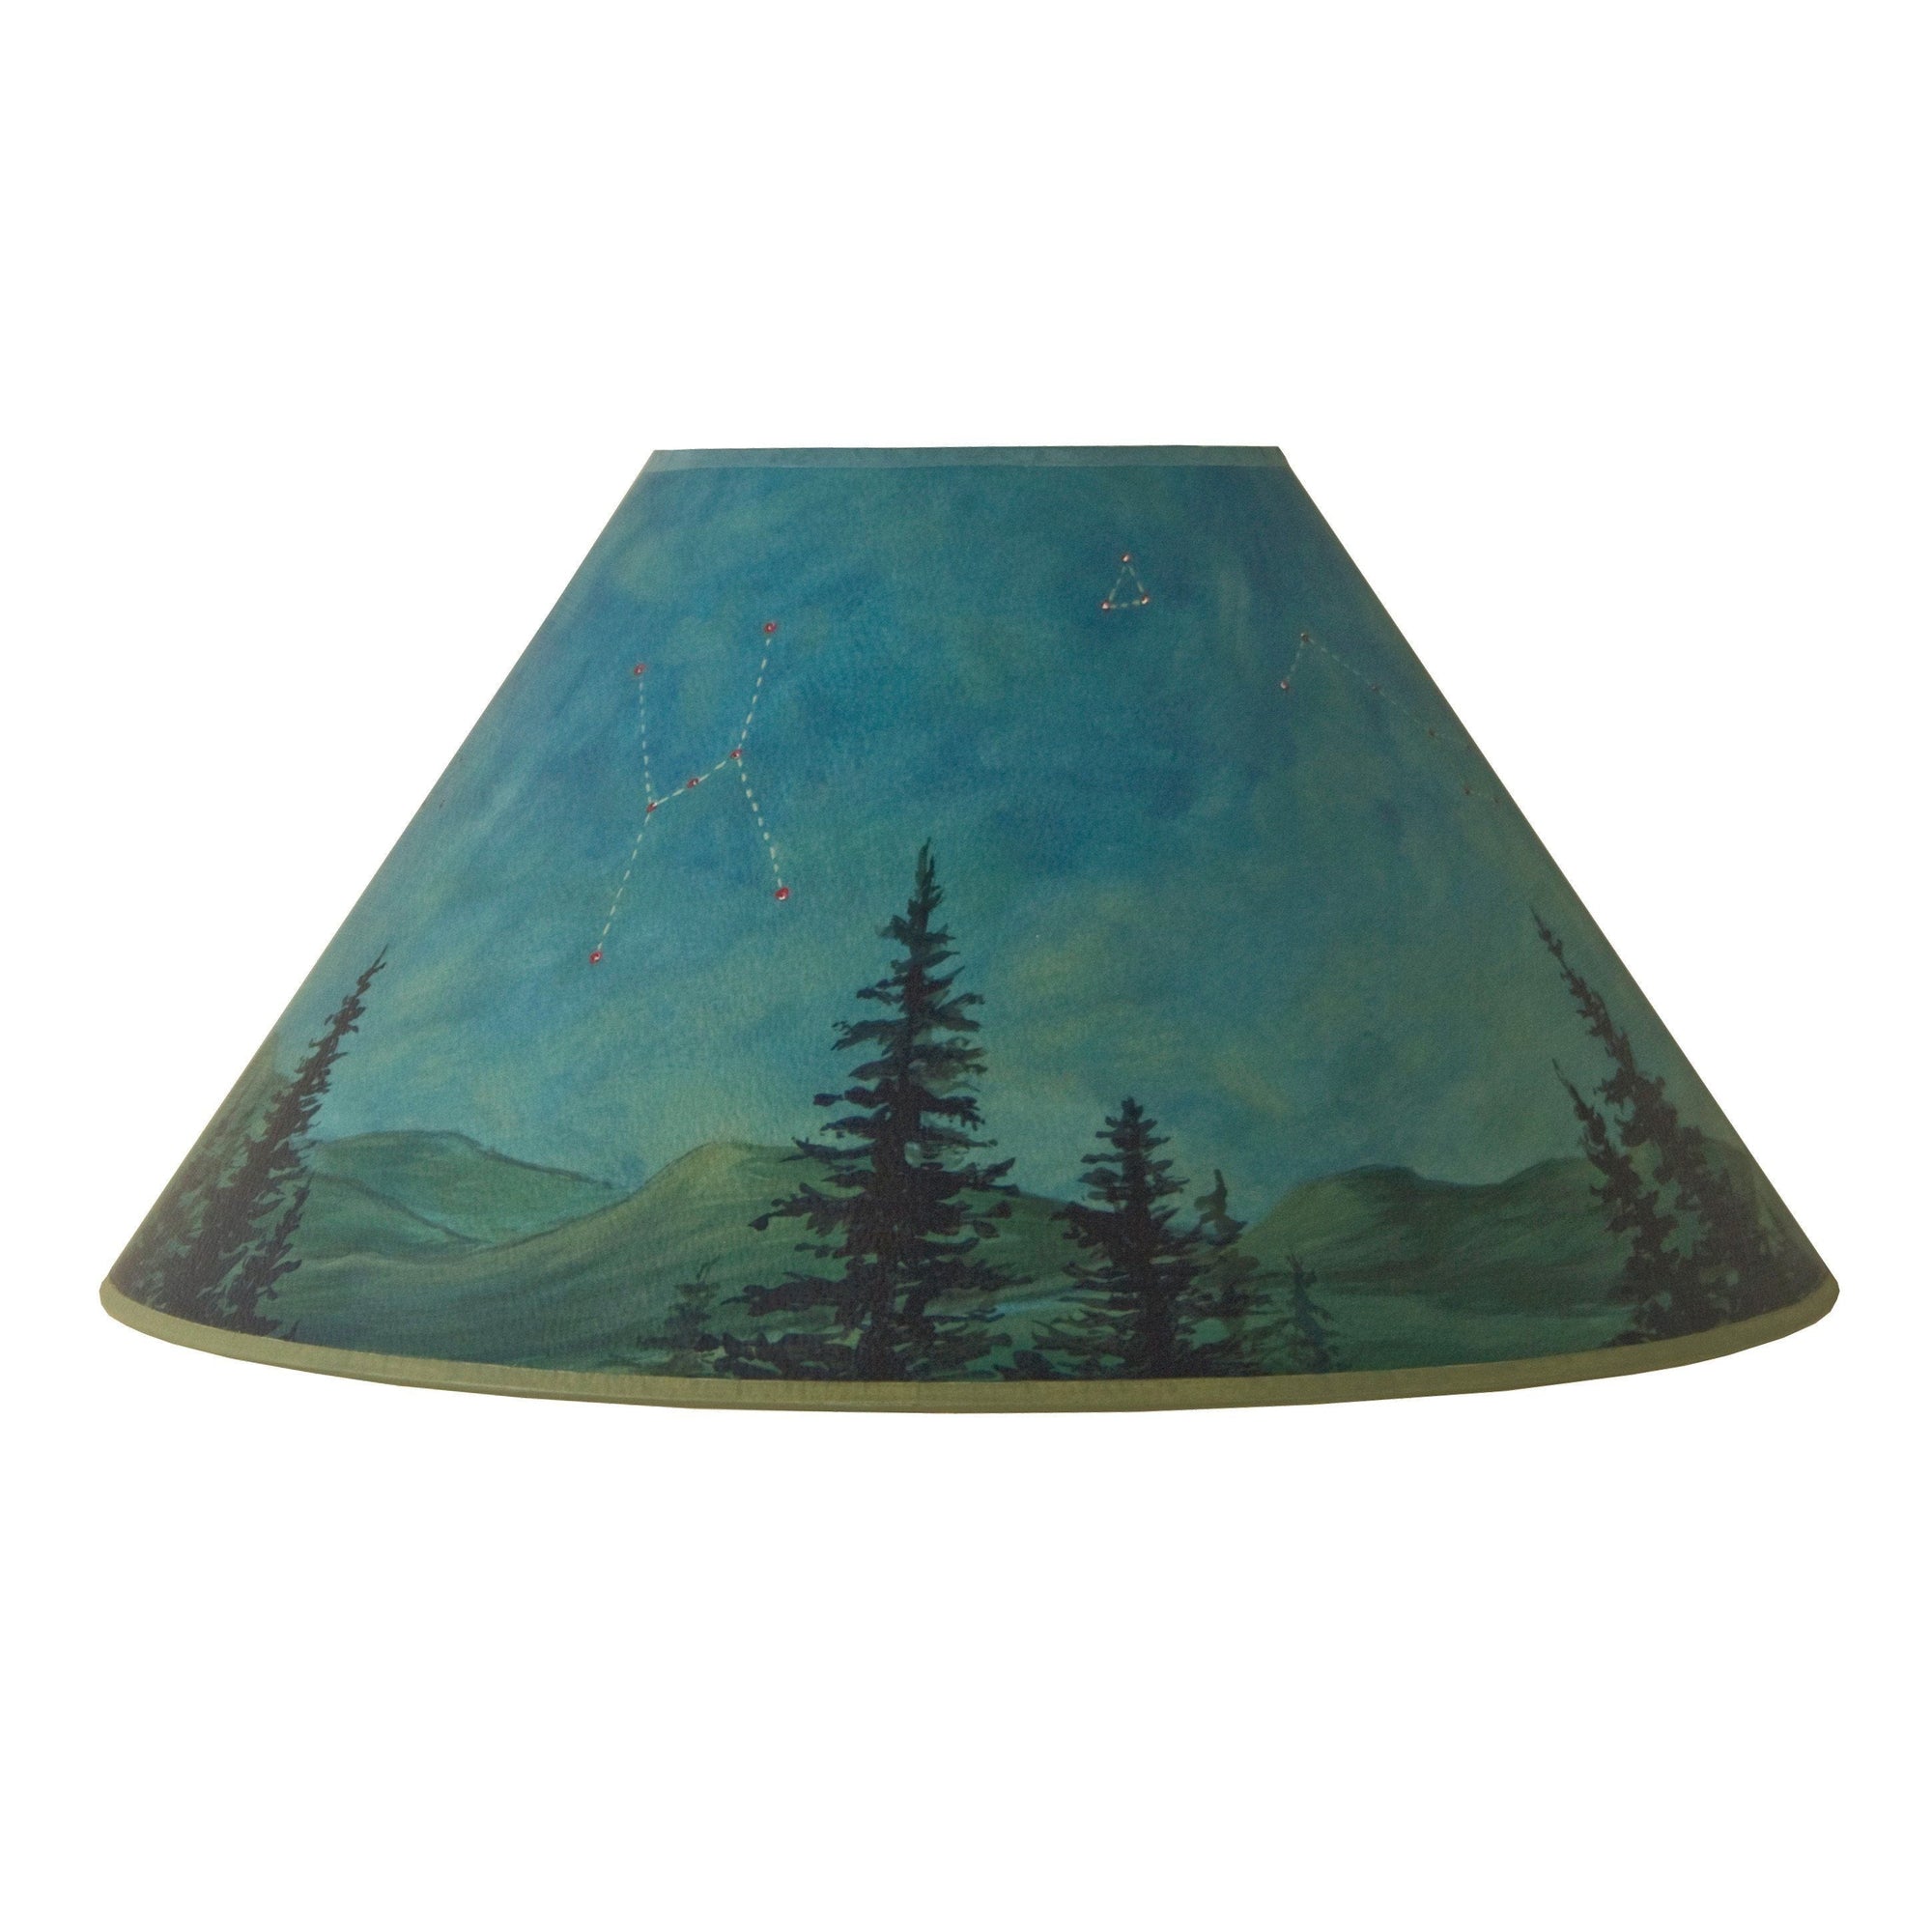 Janna Ugone & Co Lamp Shades Large Conical Lamp Shade in Midnight Sky